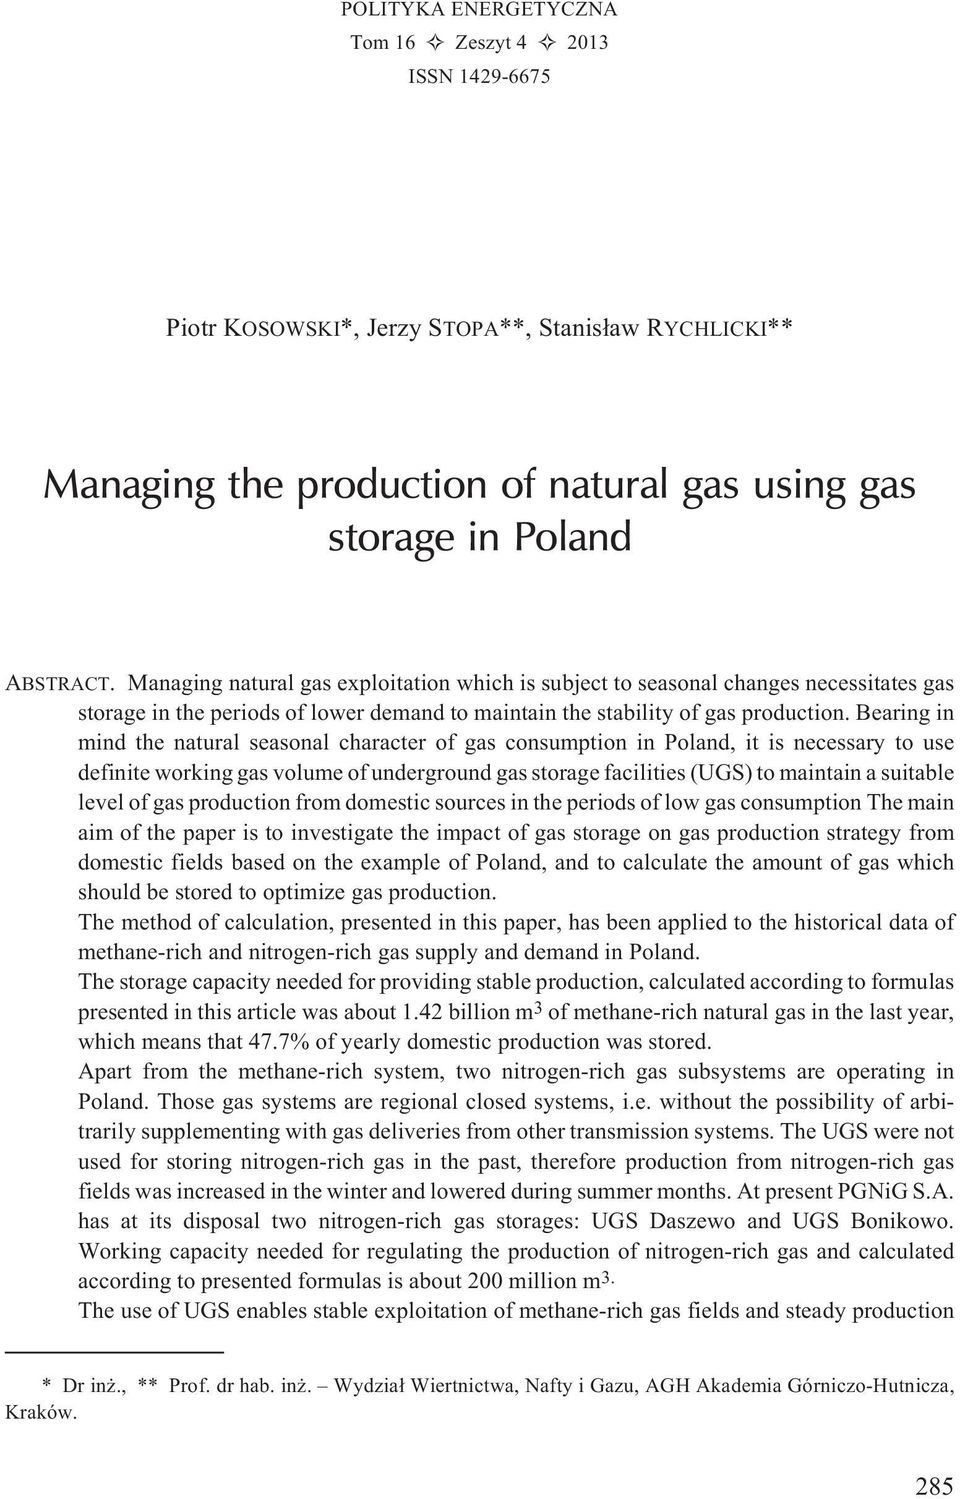 Bearing in mind the natural seasonal character of gas consumption in Poland, it is necessary to use definite working gas volume of underground gas storage facilities (UGS) to maintain a suitable